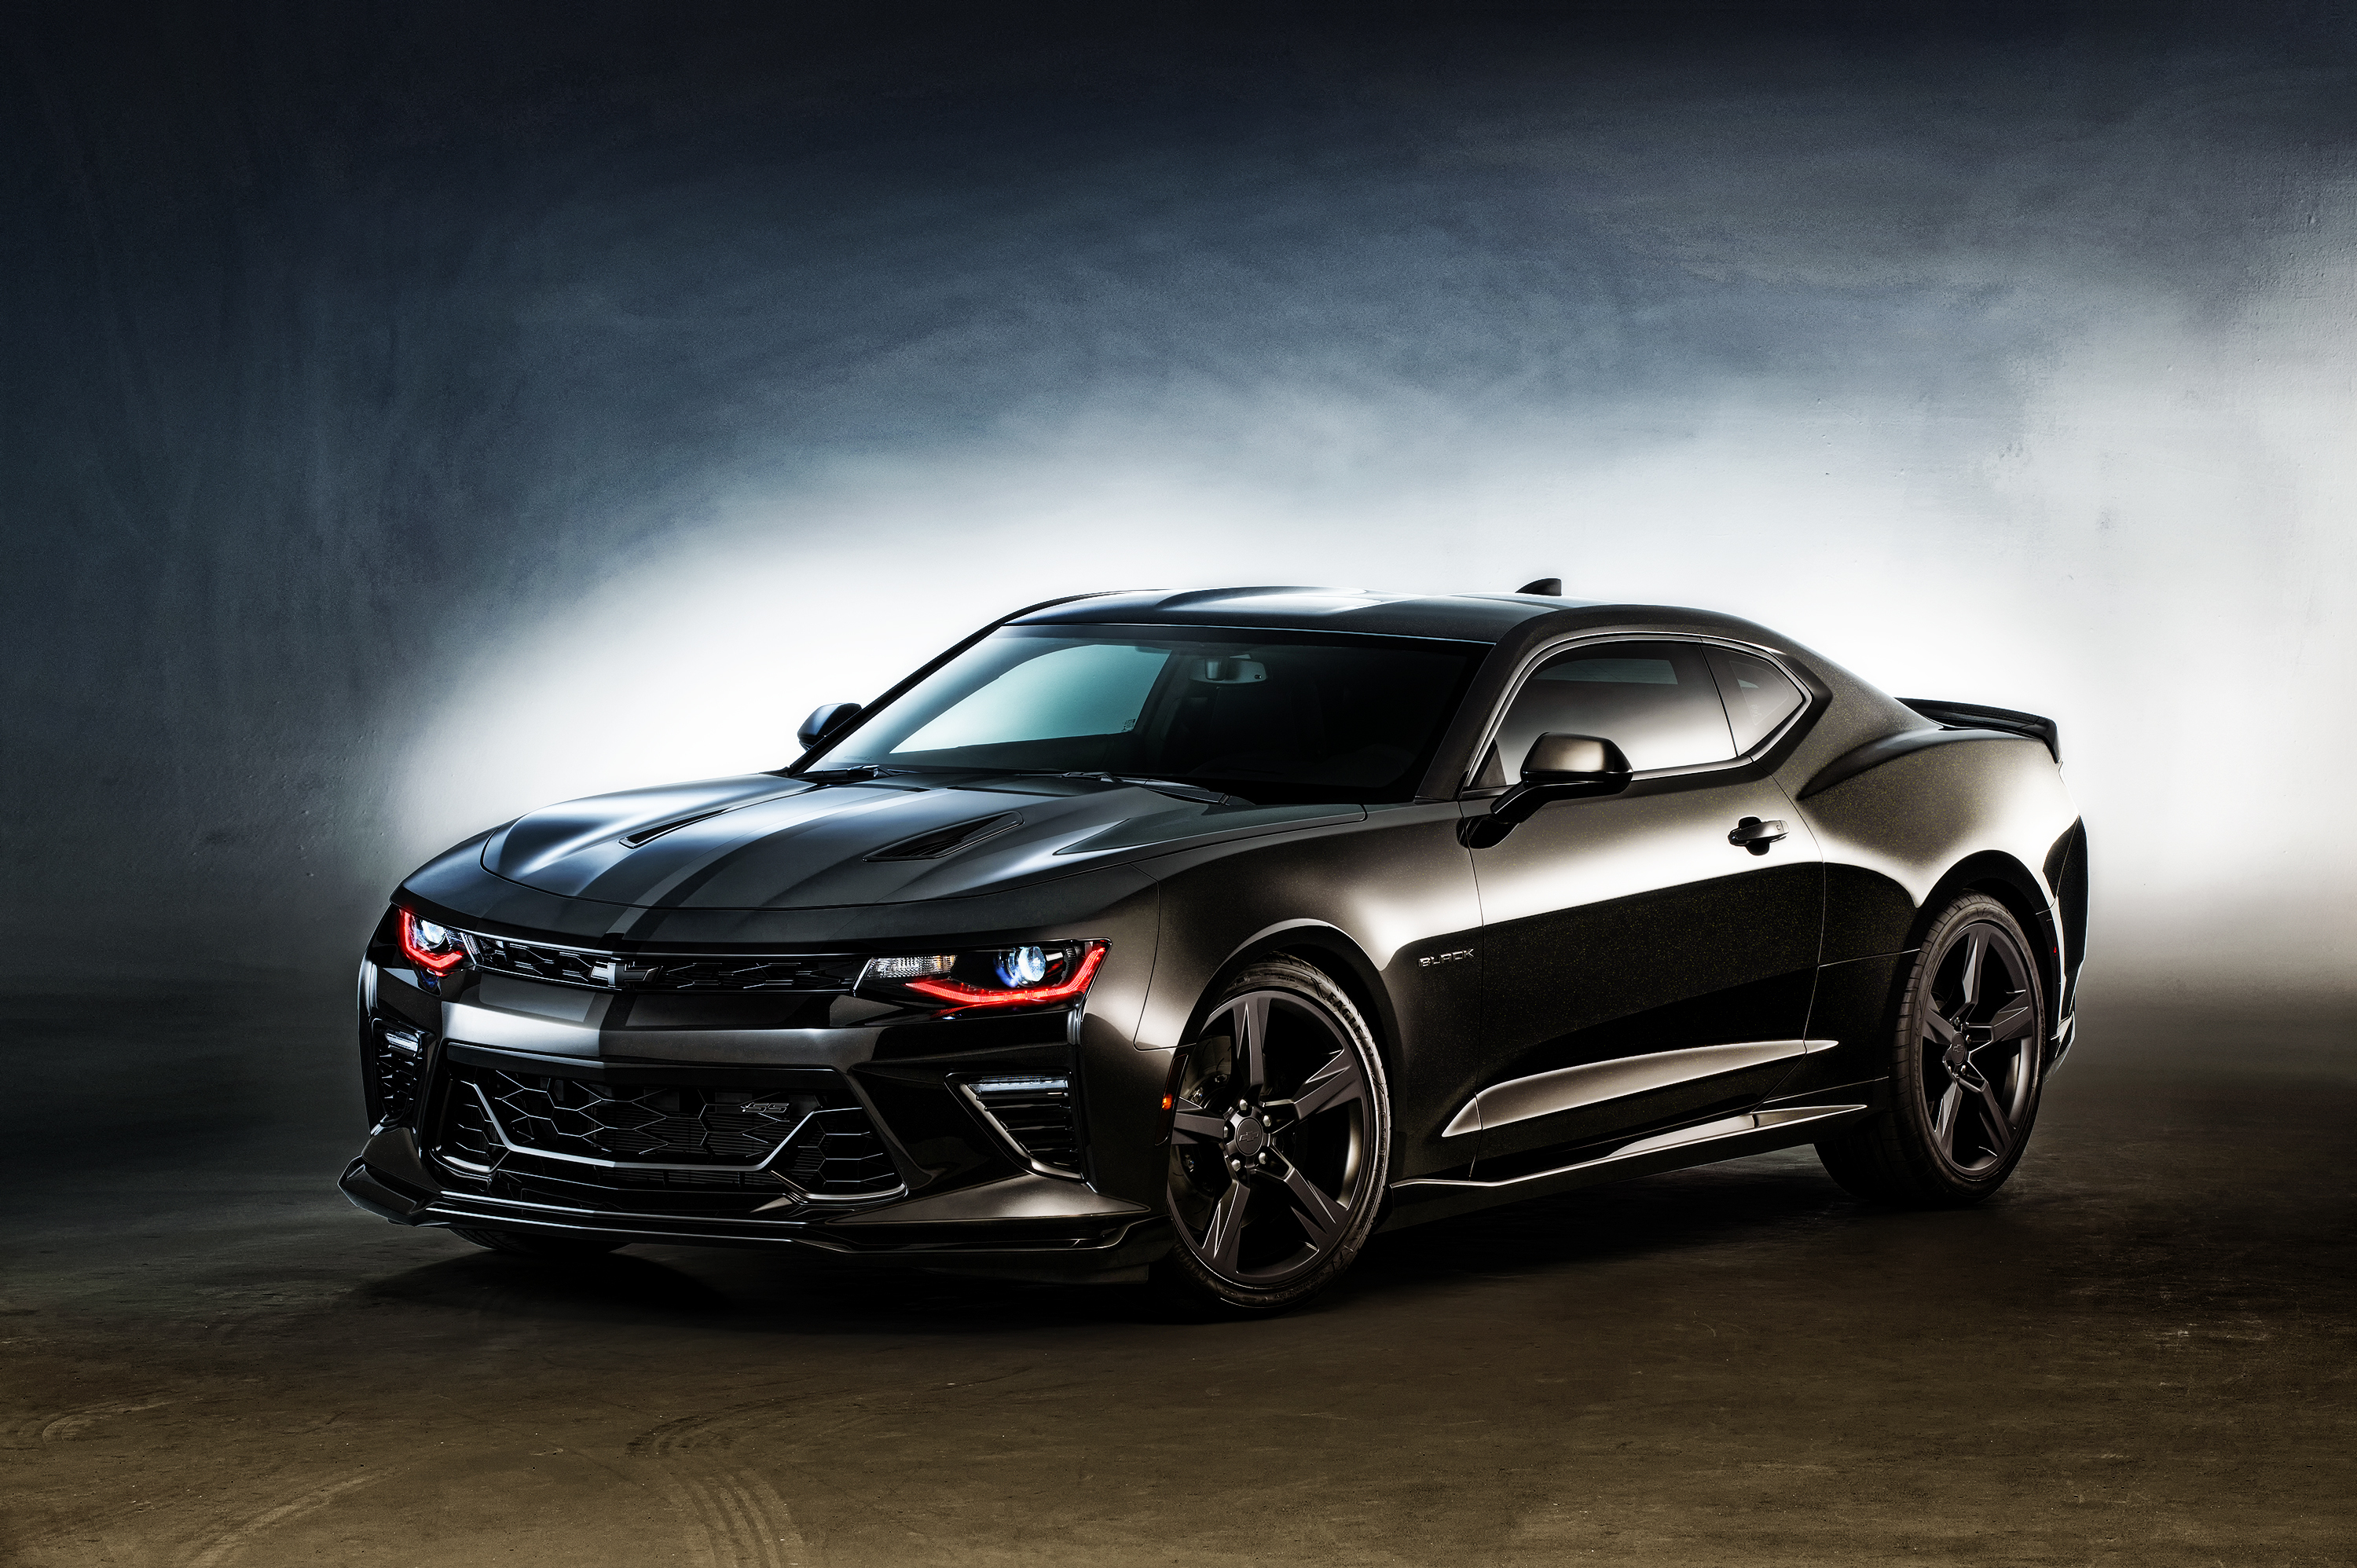 130328 download wallpaper chevrolet, cars, black, concept, side view, camaro screensavers and pictures for free